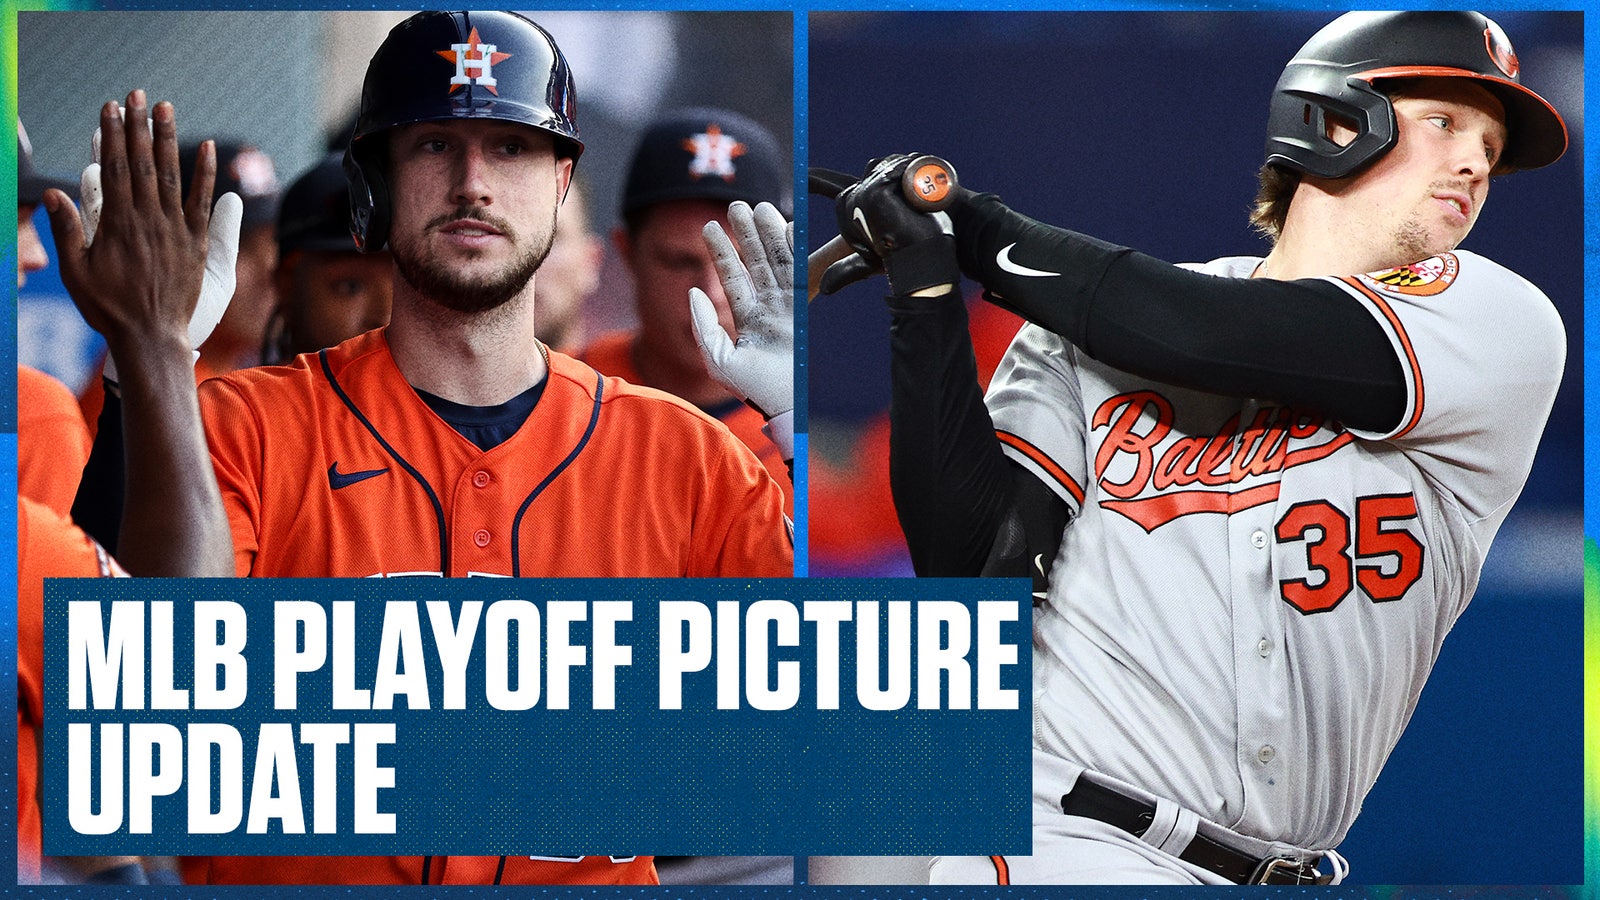 MLB Playoff Picture Update: Will the Orioles hold on? Are the Astros the team to beat?